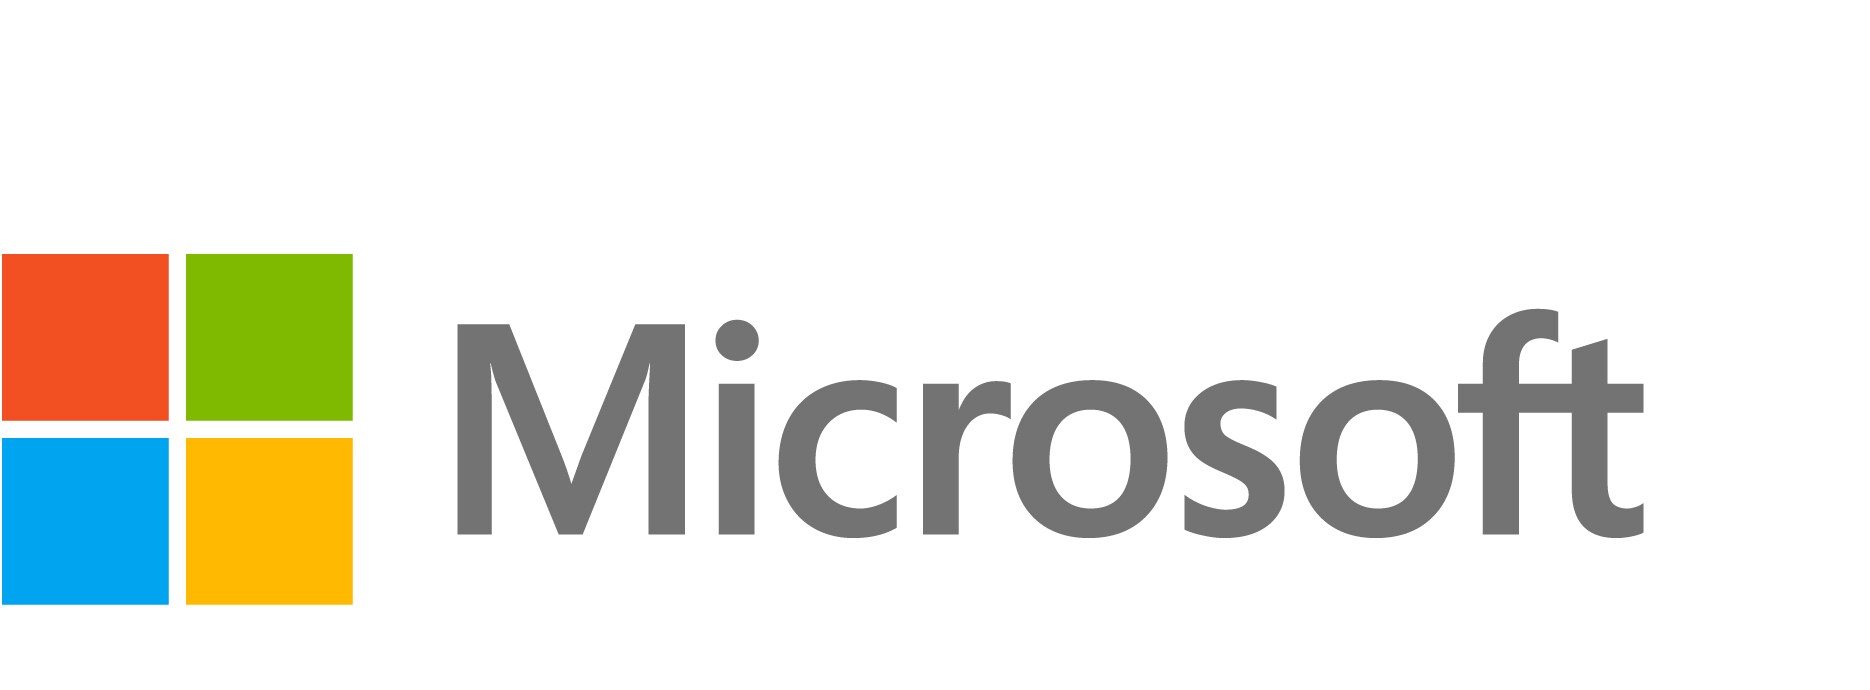 Microsoft Power Automate Unattended Robotic Process Automation add-on - subscription license - 1 bot